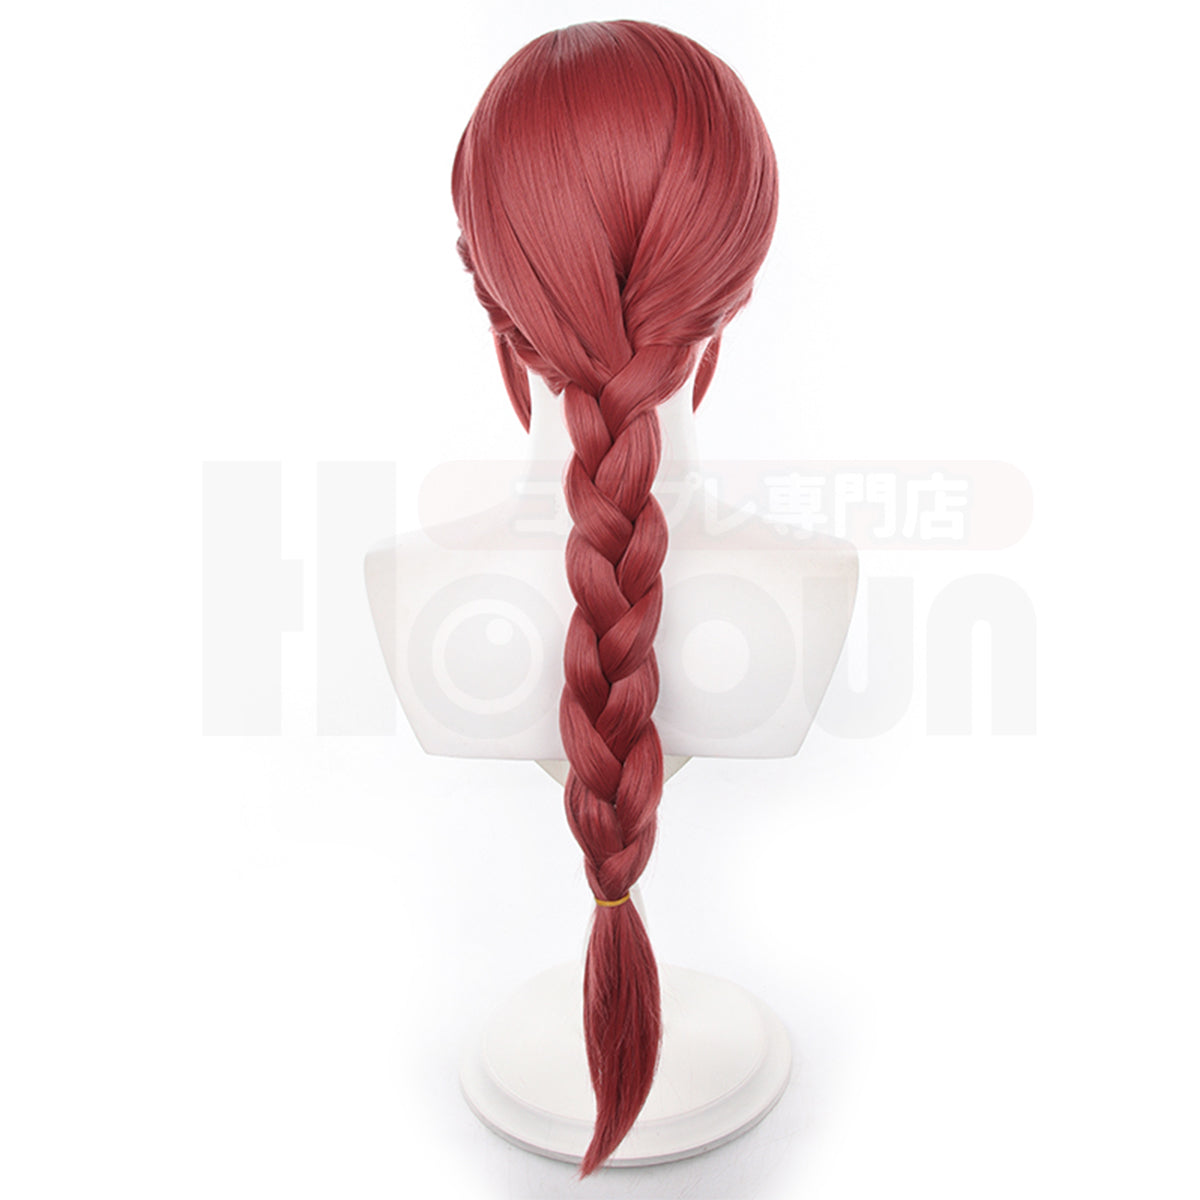 HOLOUN Blue Lock Anime Chigiri Cosplay China Costume Red Kung Fu Tang Suit Wig Rose Net Sythetic Fibers Adjustable Size Gift